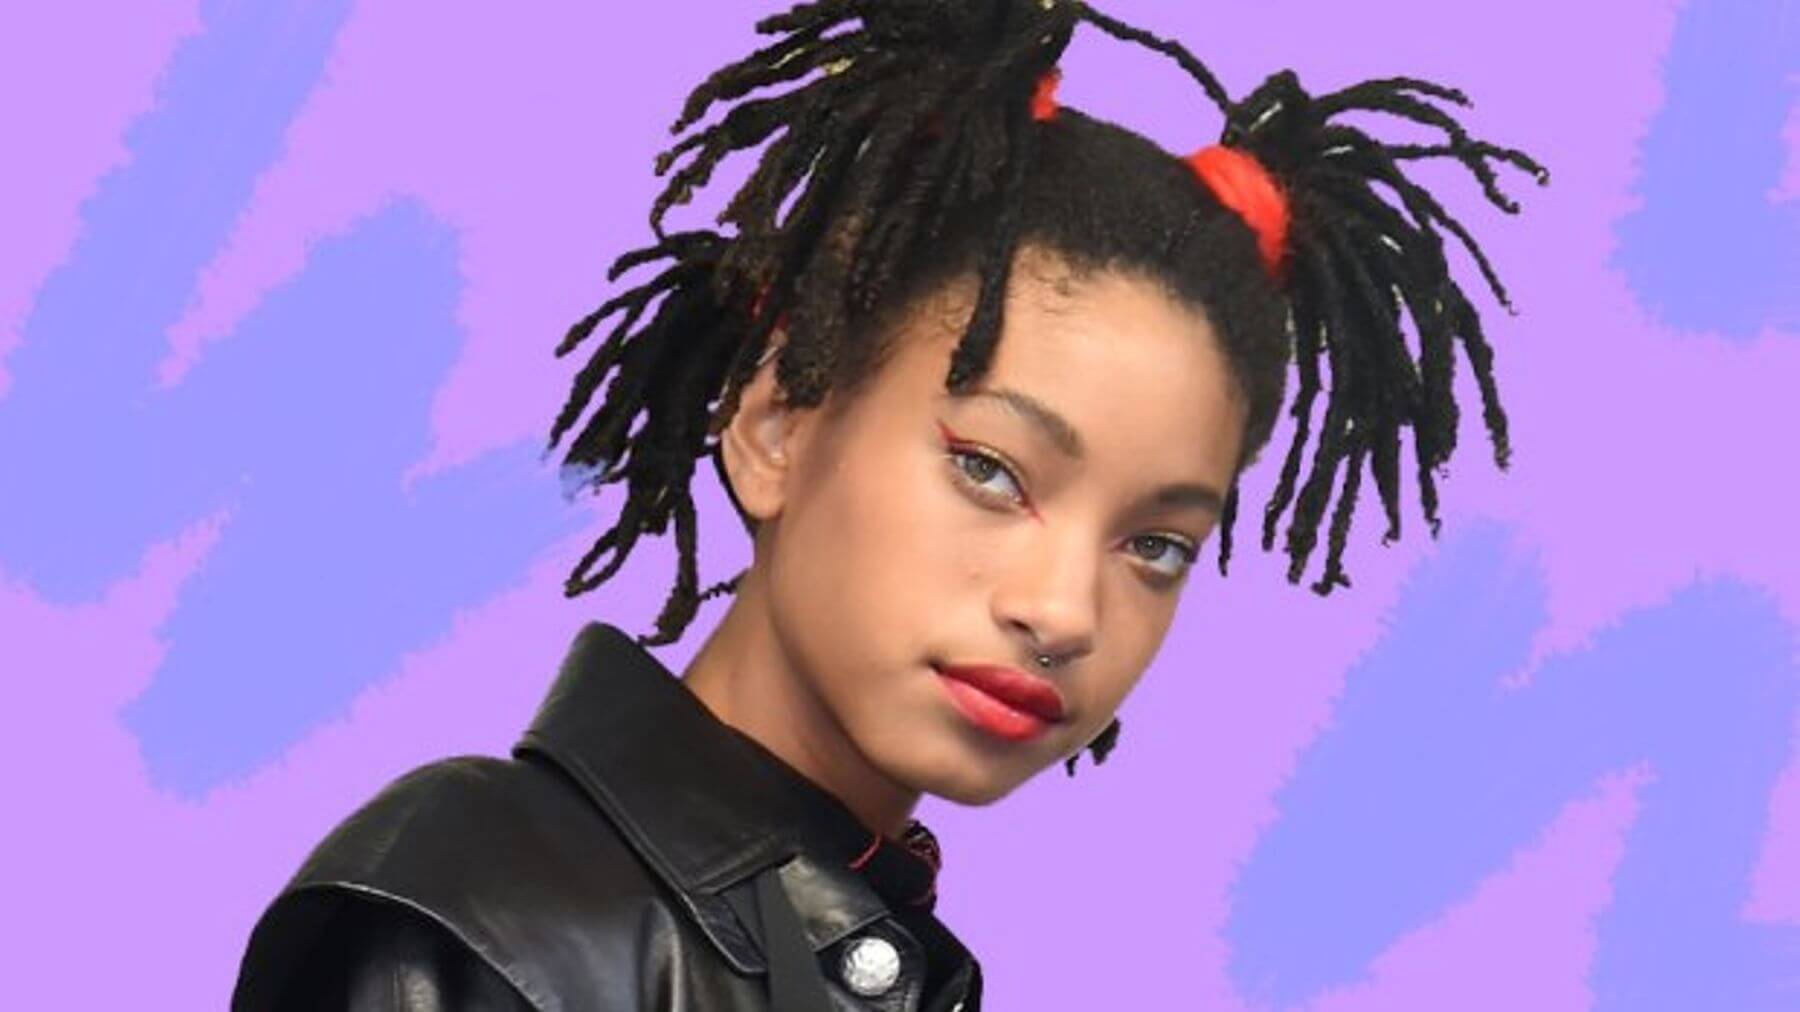 willow smith likes men and women